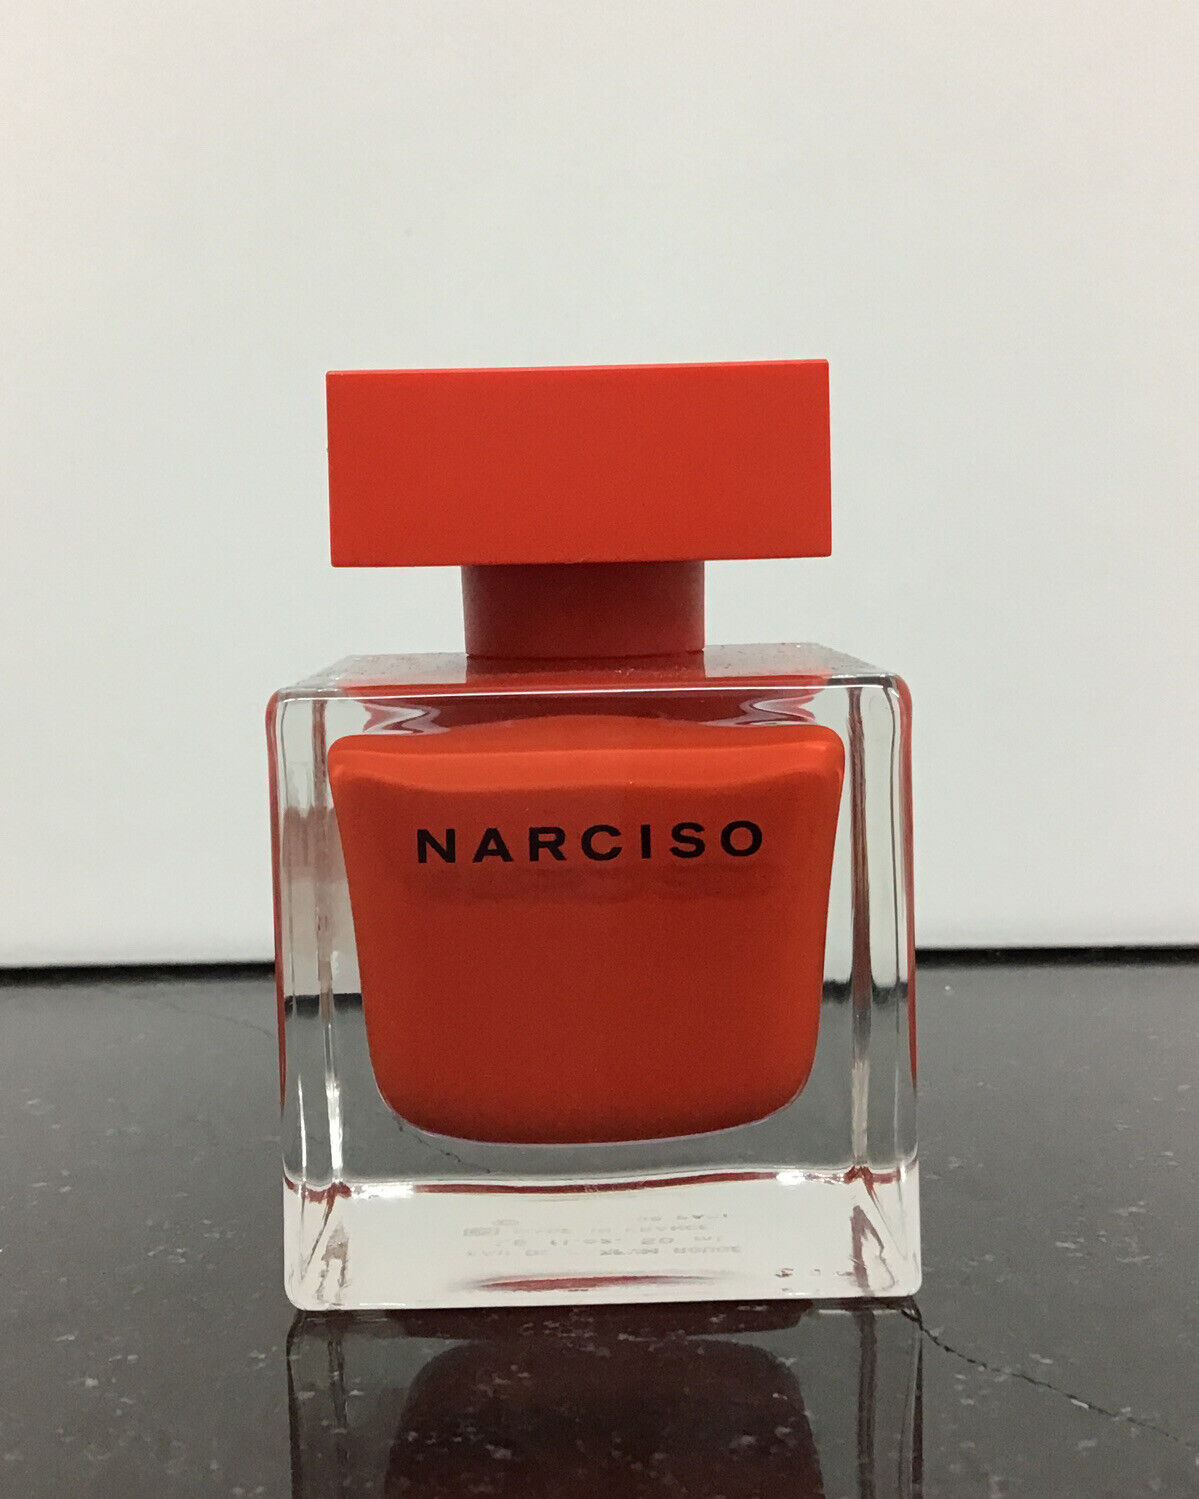 Narciso Rouge by Narciso Rodriguez Eau de parfum spray 1.6 fl oz, As pictured.